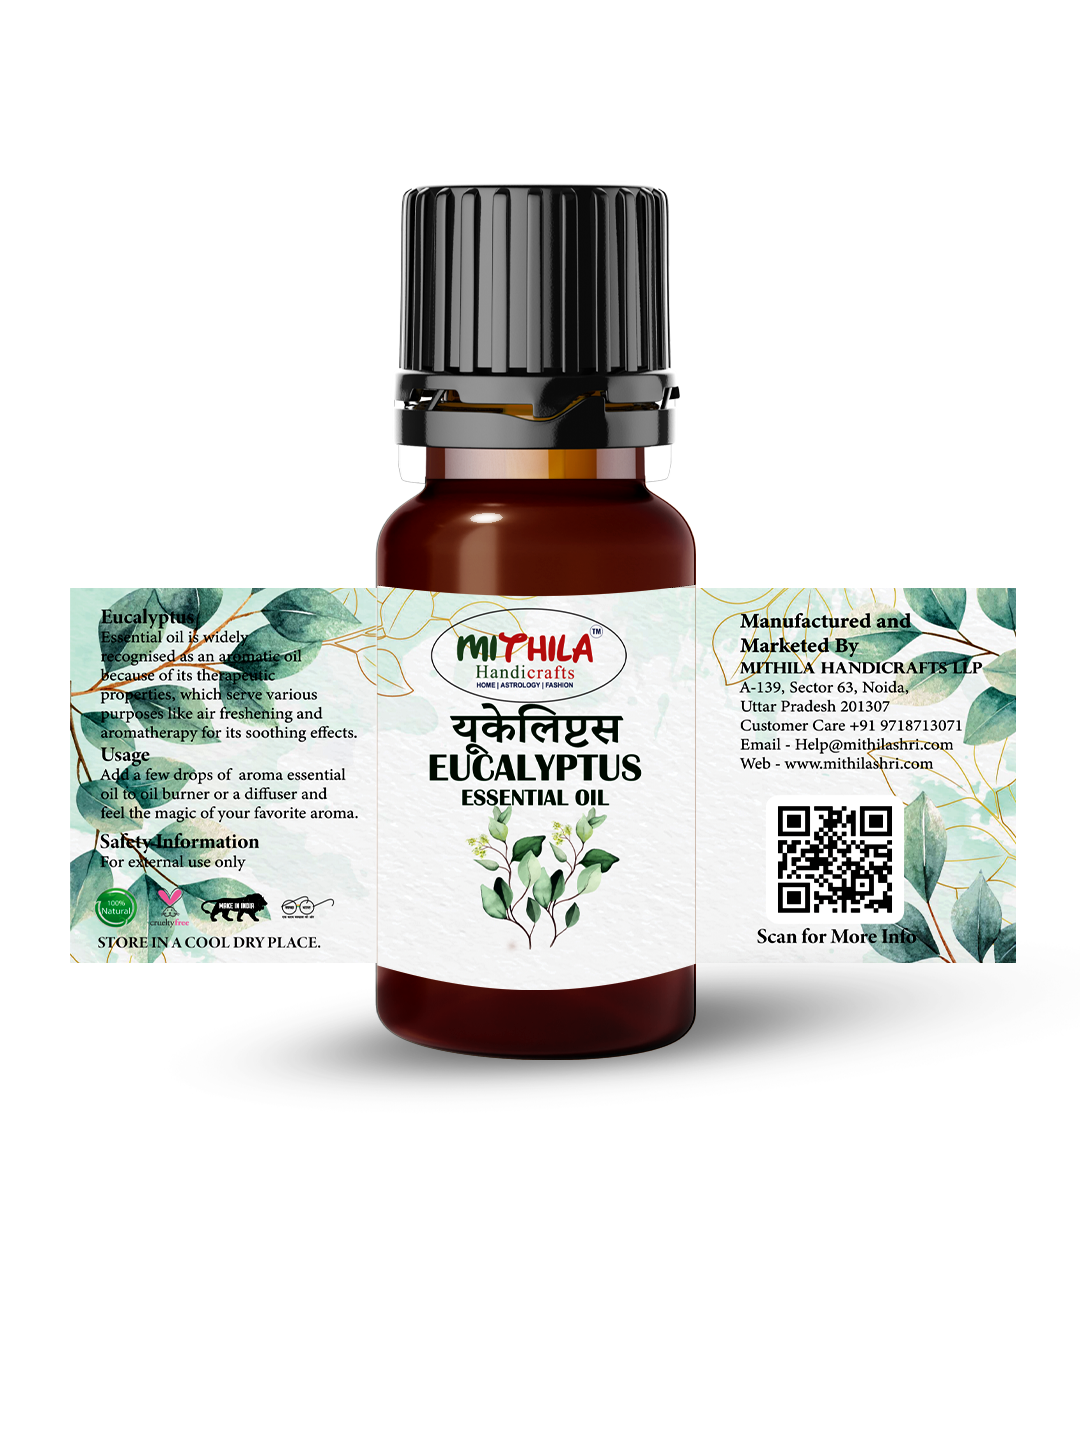 Eucalyptus Essential Oil For Skin, Hair Care, Home Fragrance, Aroma Therapy 15ml (Pack of 2)